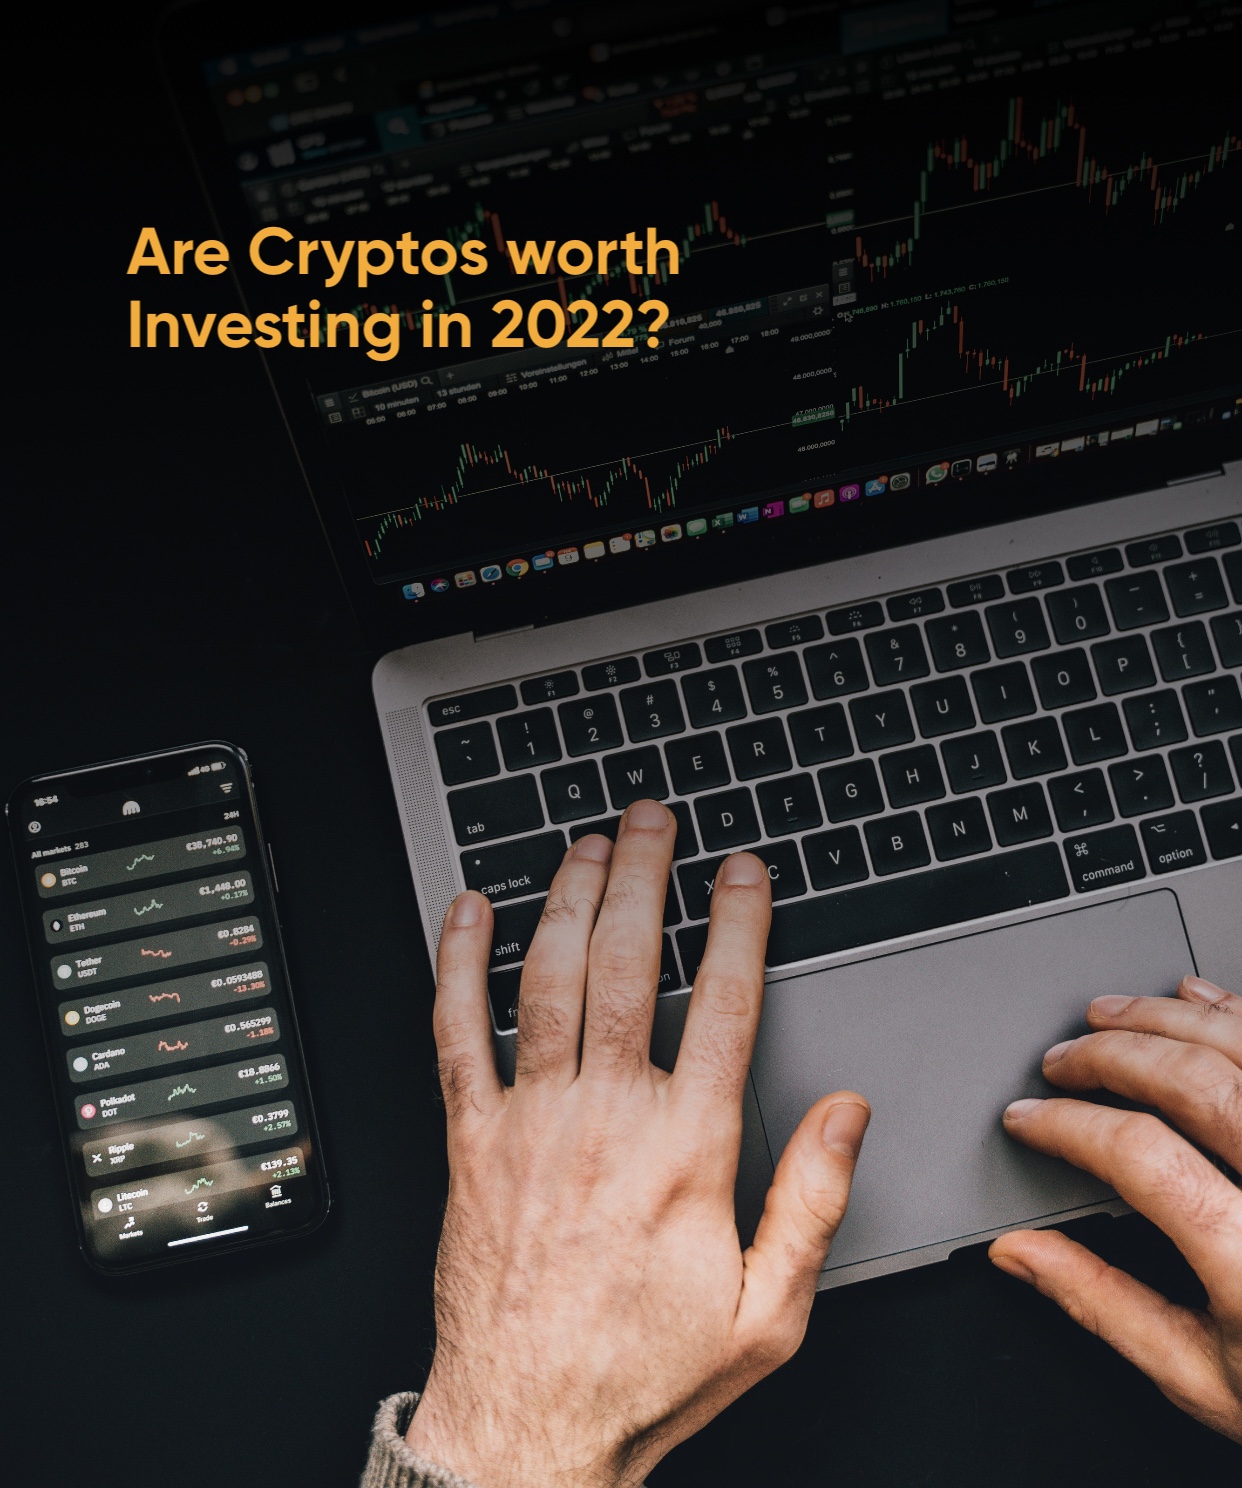 Are Cryptos worth Investing in 2022?